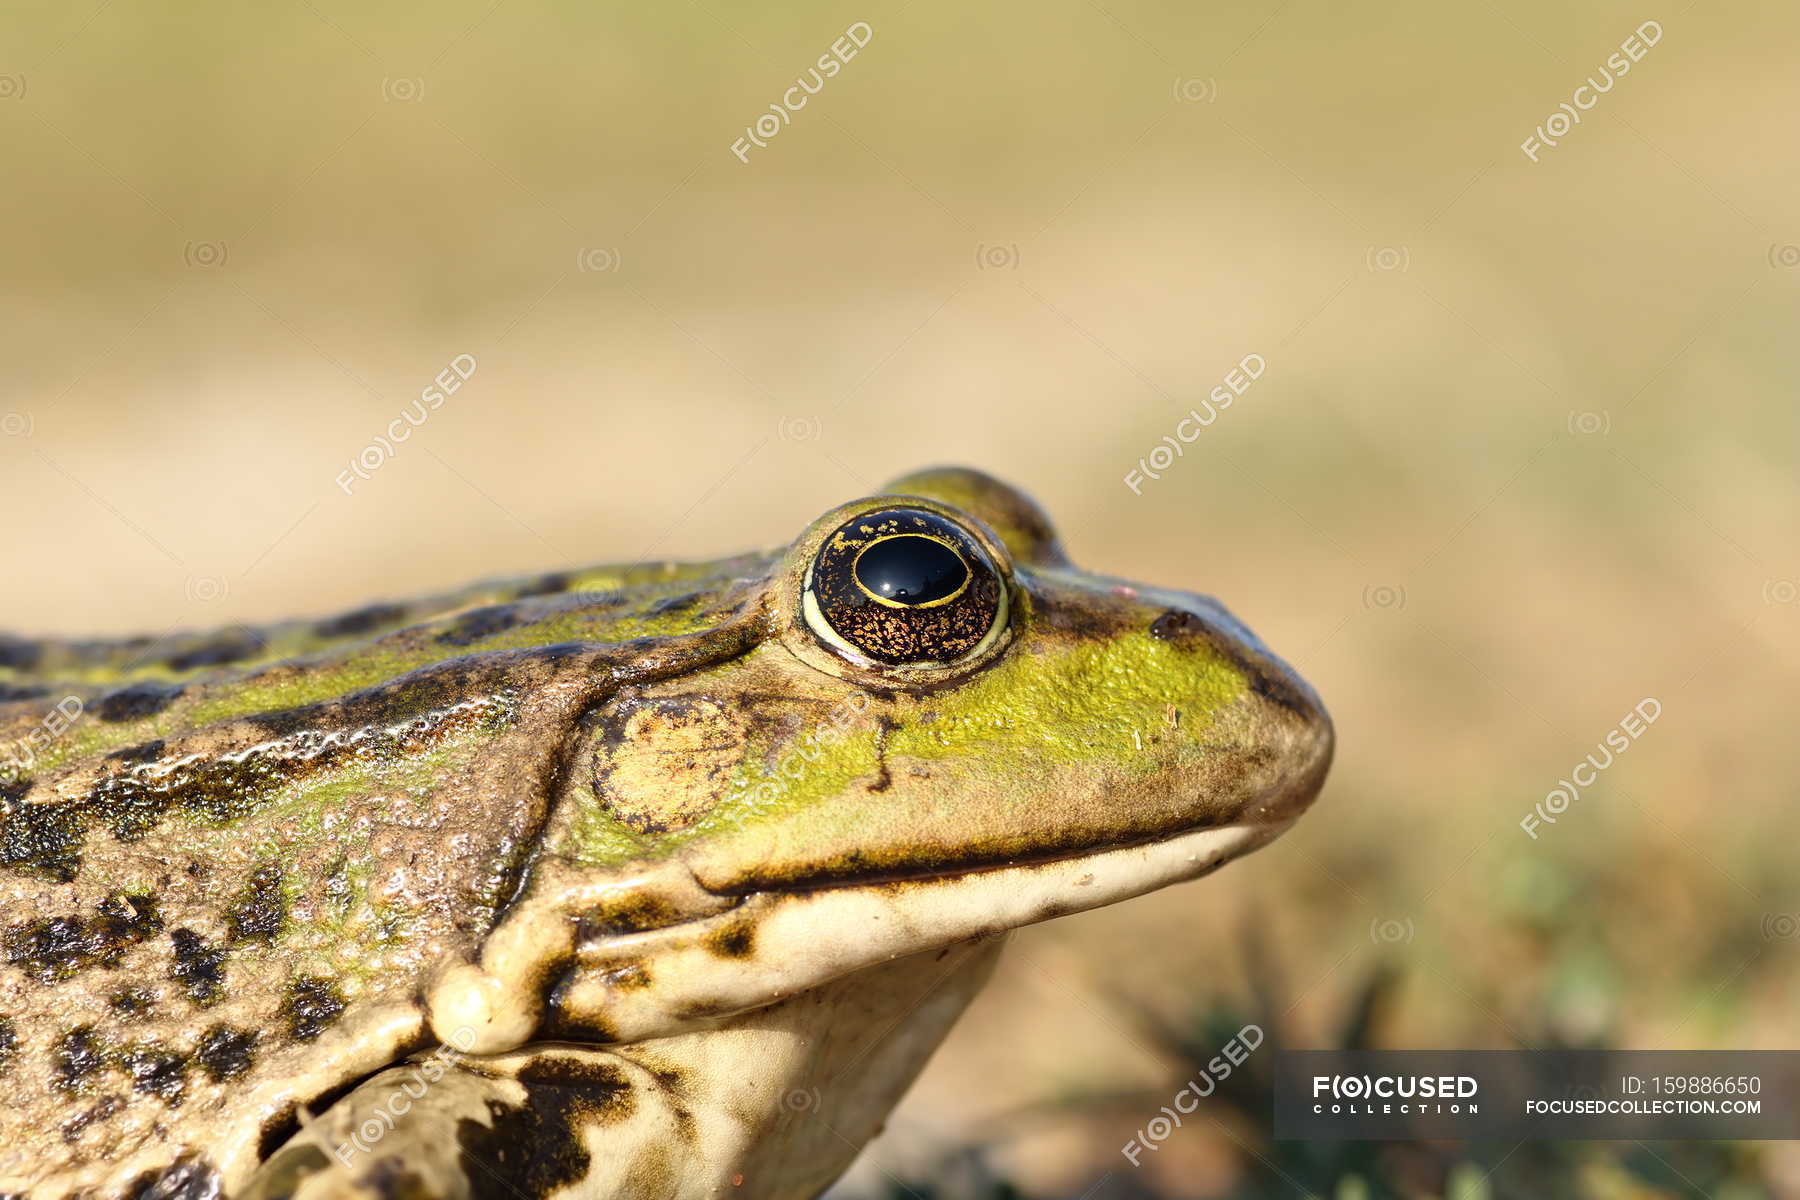 Frog in wild nature — Stock Photo | #159886650